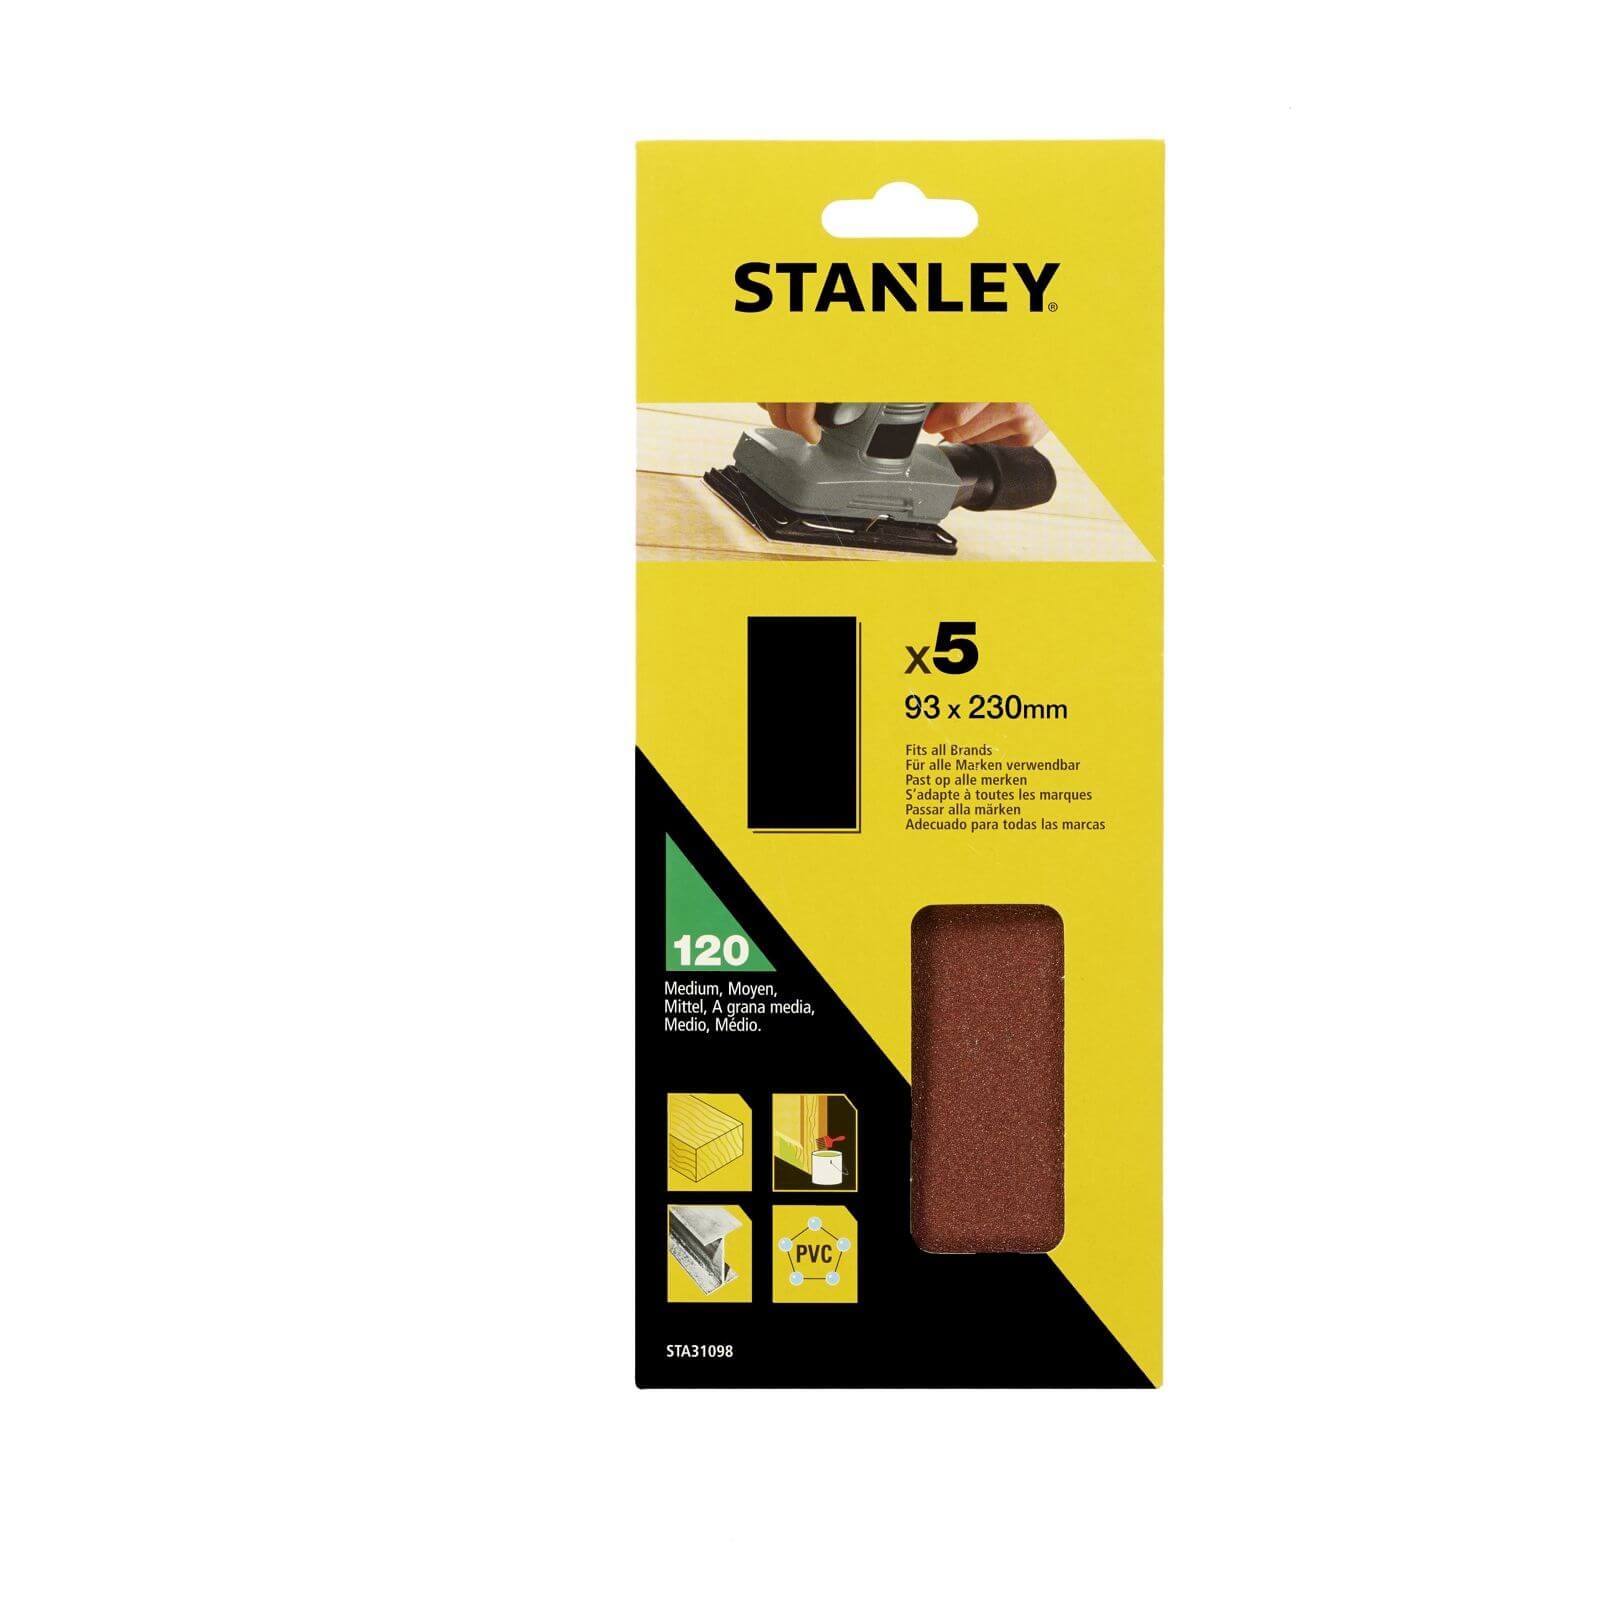 Photo of Stanley 1/3 Sheet Sander Unpunched Wire Clip 120g Sanding Sheets - Sta31098-xj